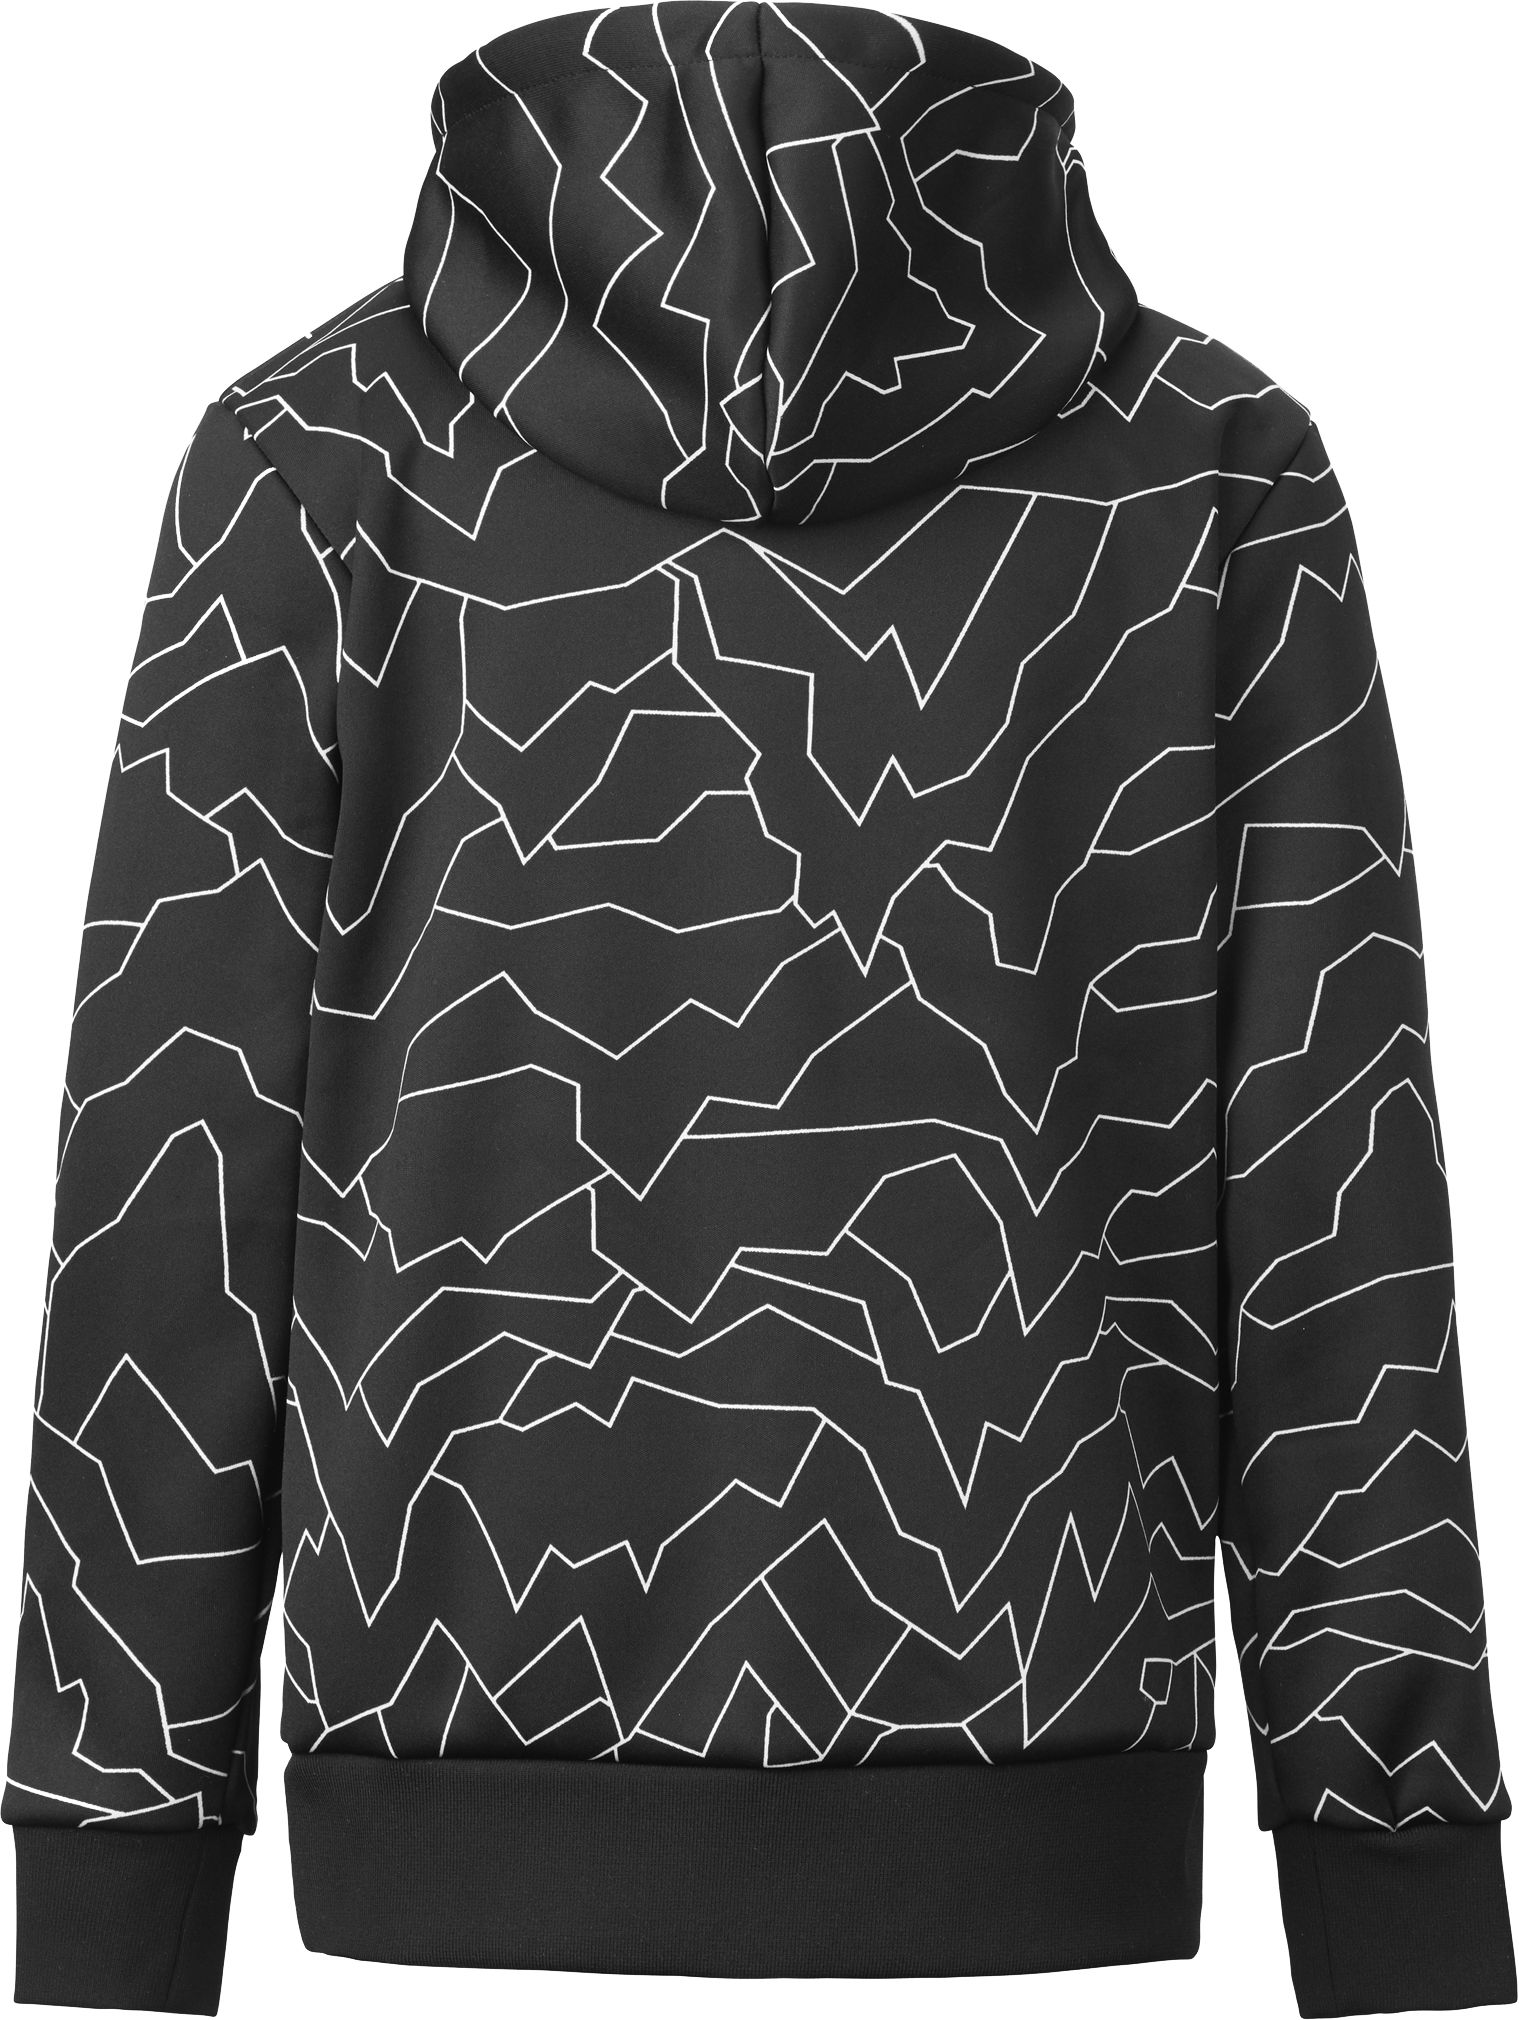 PICTURE, J PARK TECH YOUTH HOODIE